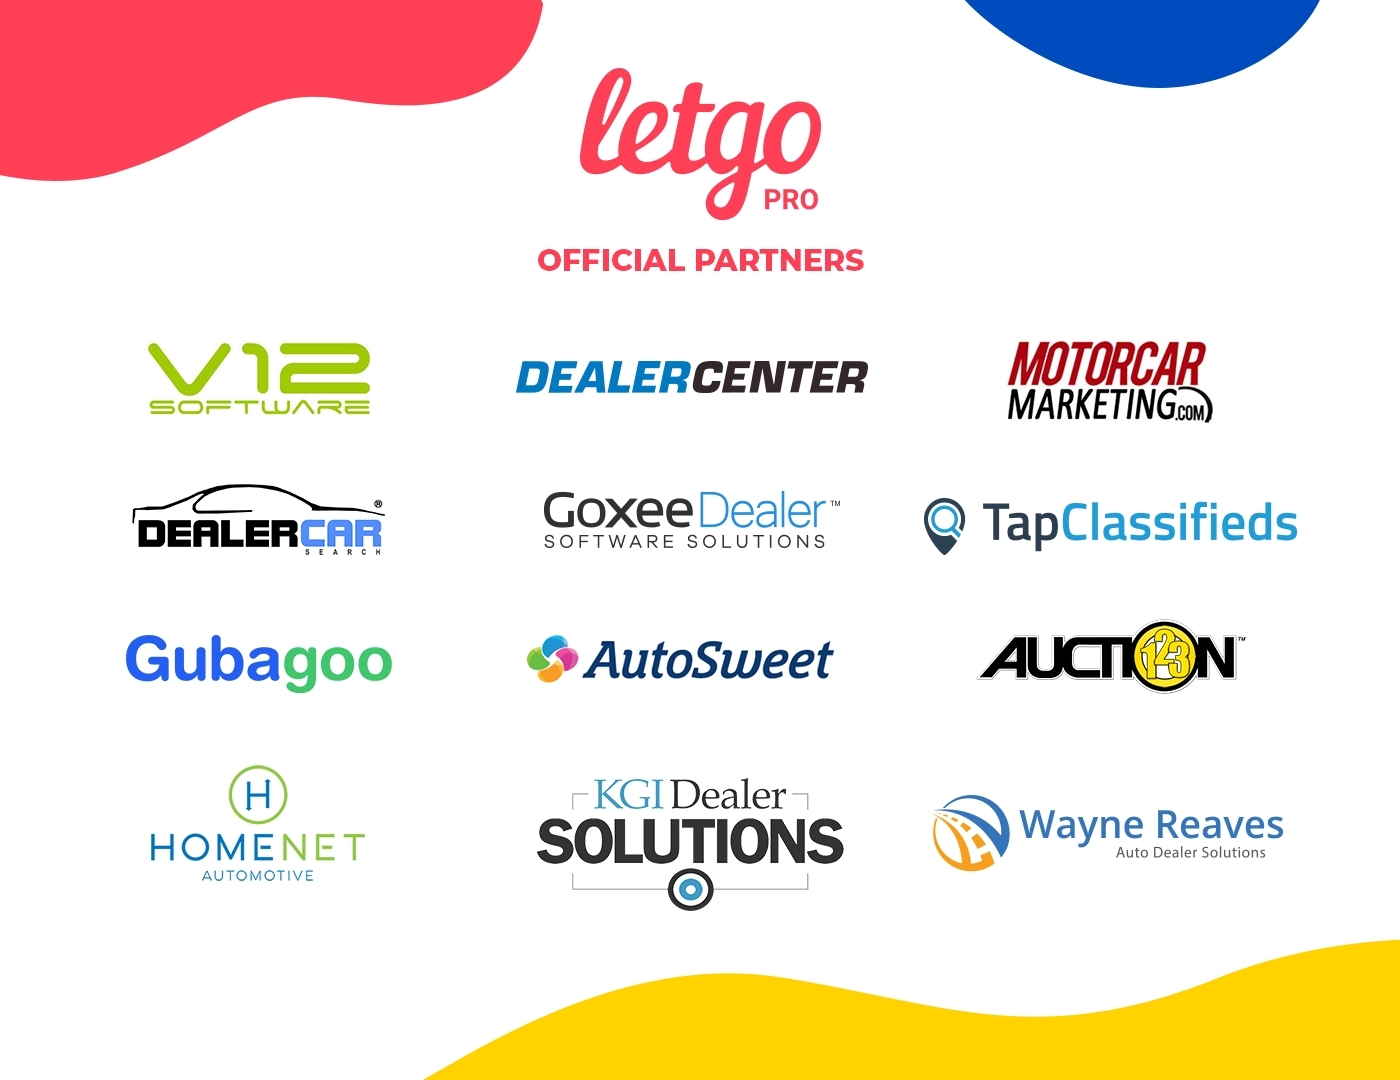 Letgo Partners With 12 Auto Leaders To Make Buying And Selling Cars Simpler Business Wire